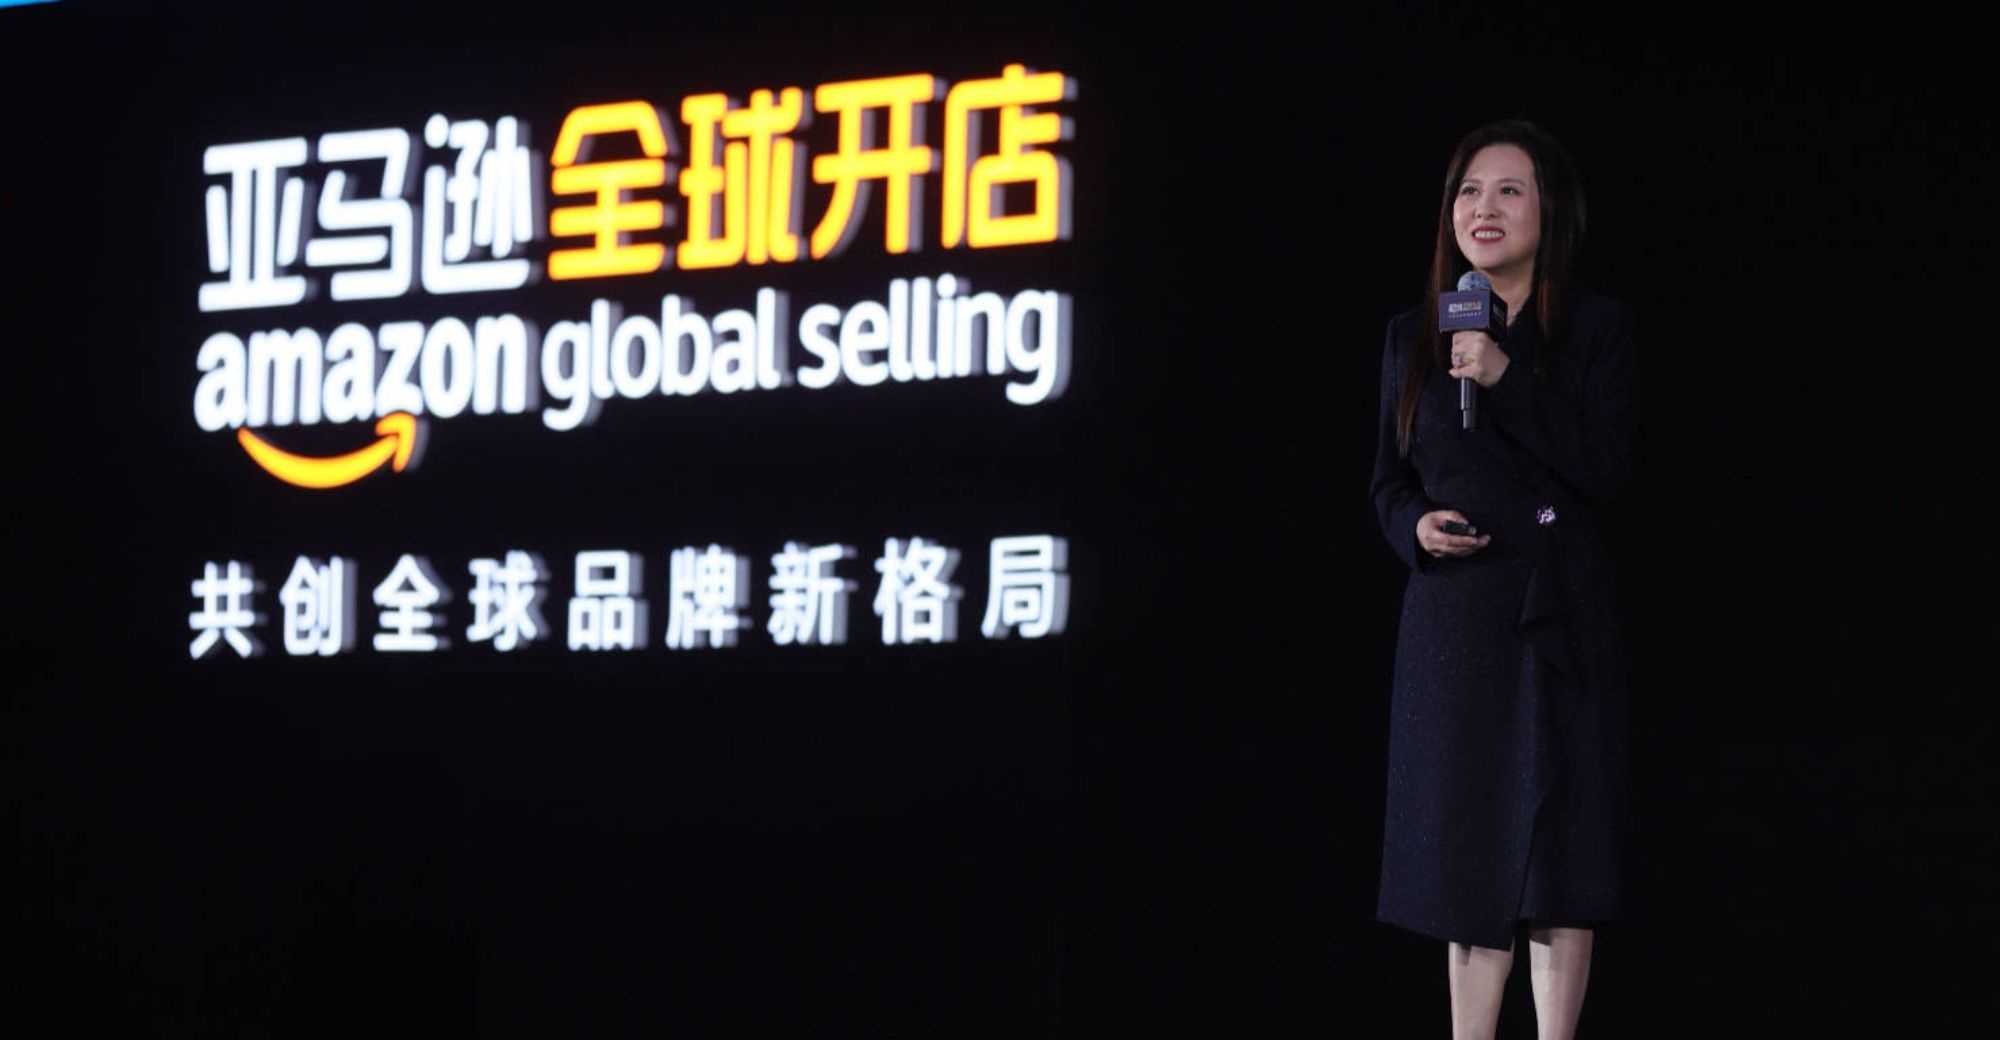 Amazon Global Selling’s First Innovation Center Settles in Shenzhen